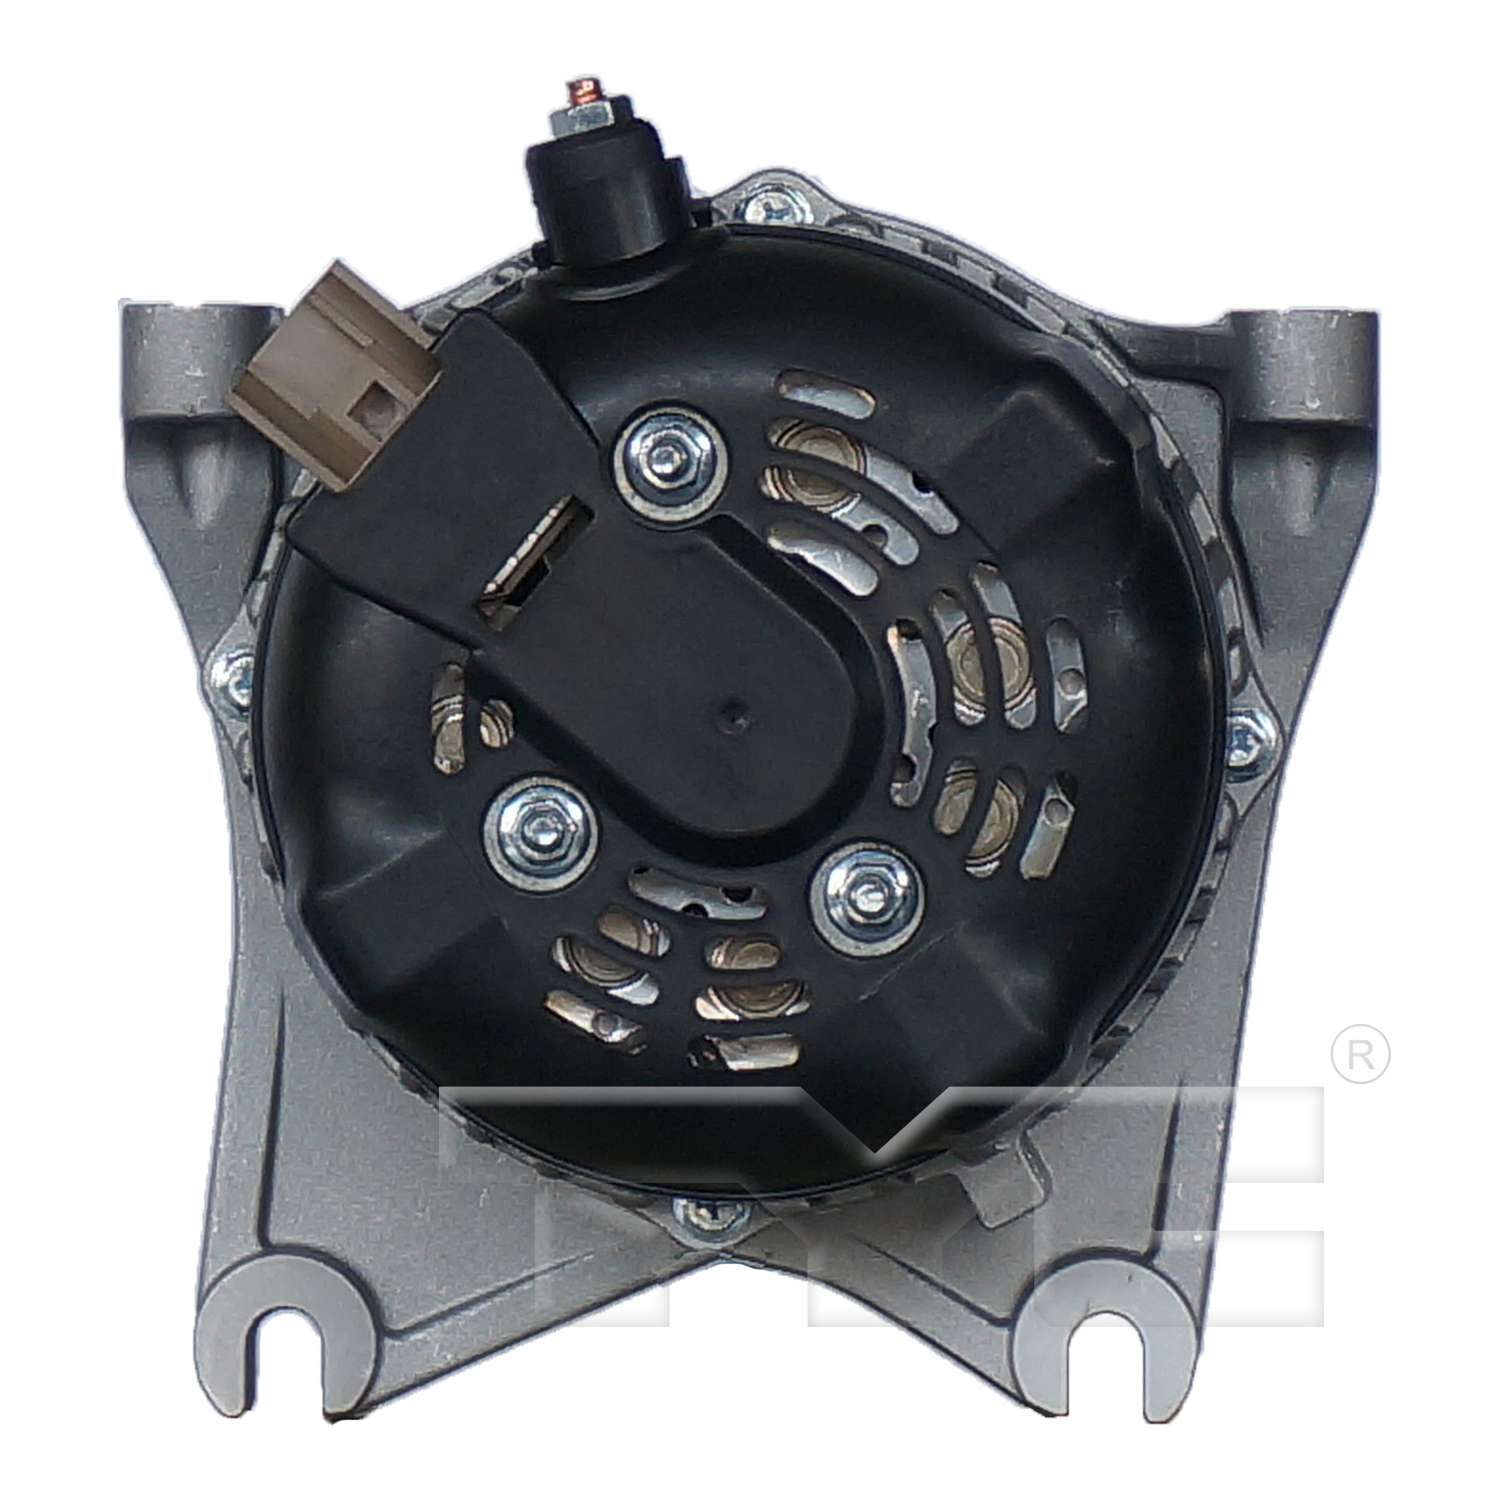 TYC-2-11292_NEW TYC ALTERNATOR 12V 150AMP DENSO SC (HAIRPIN) FOR 2008-2014 FORD LIGHT DUTY TRUCK & SUV WITH 4.6L AND 5.4L ENGINES